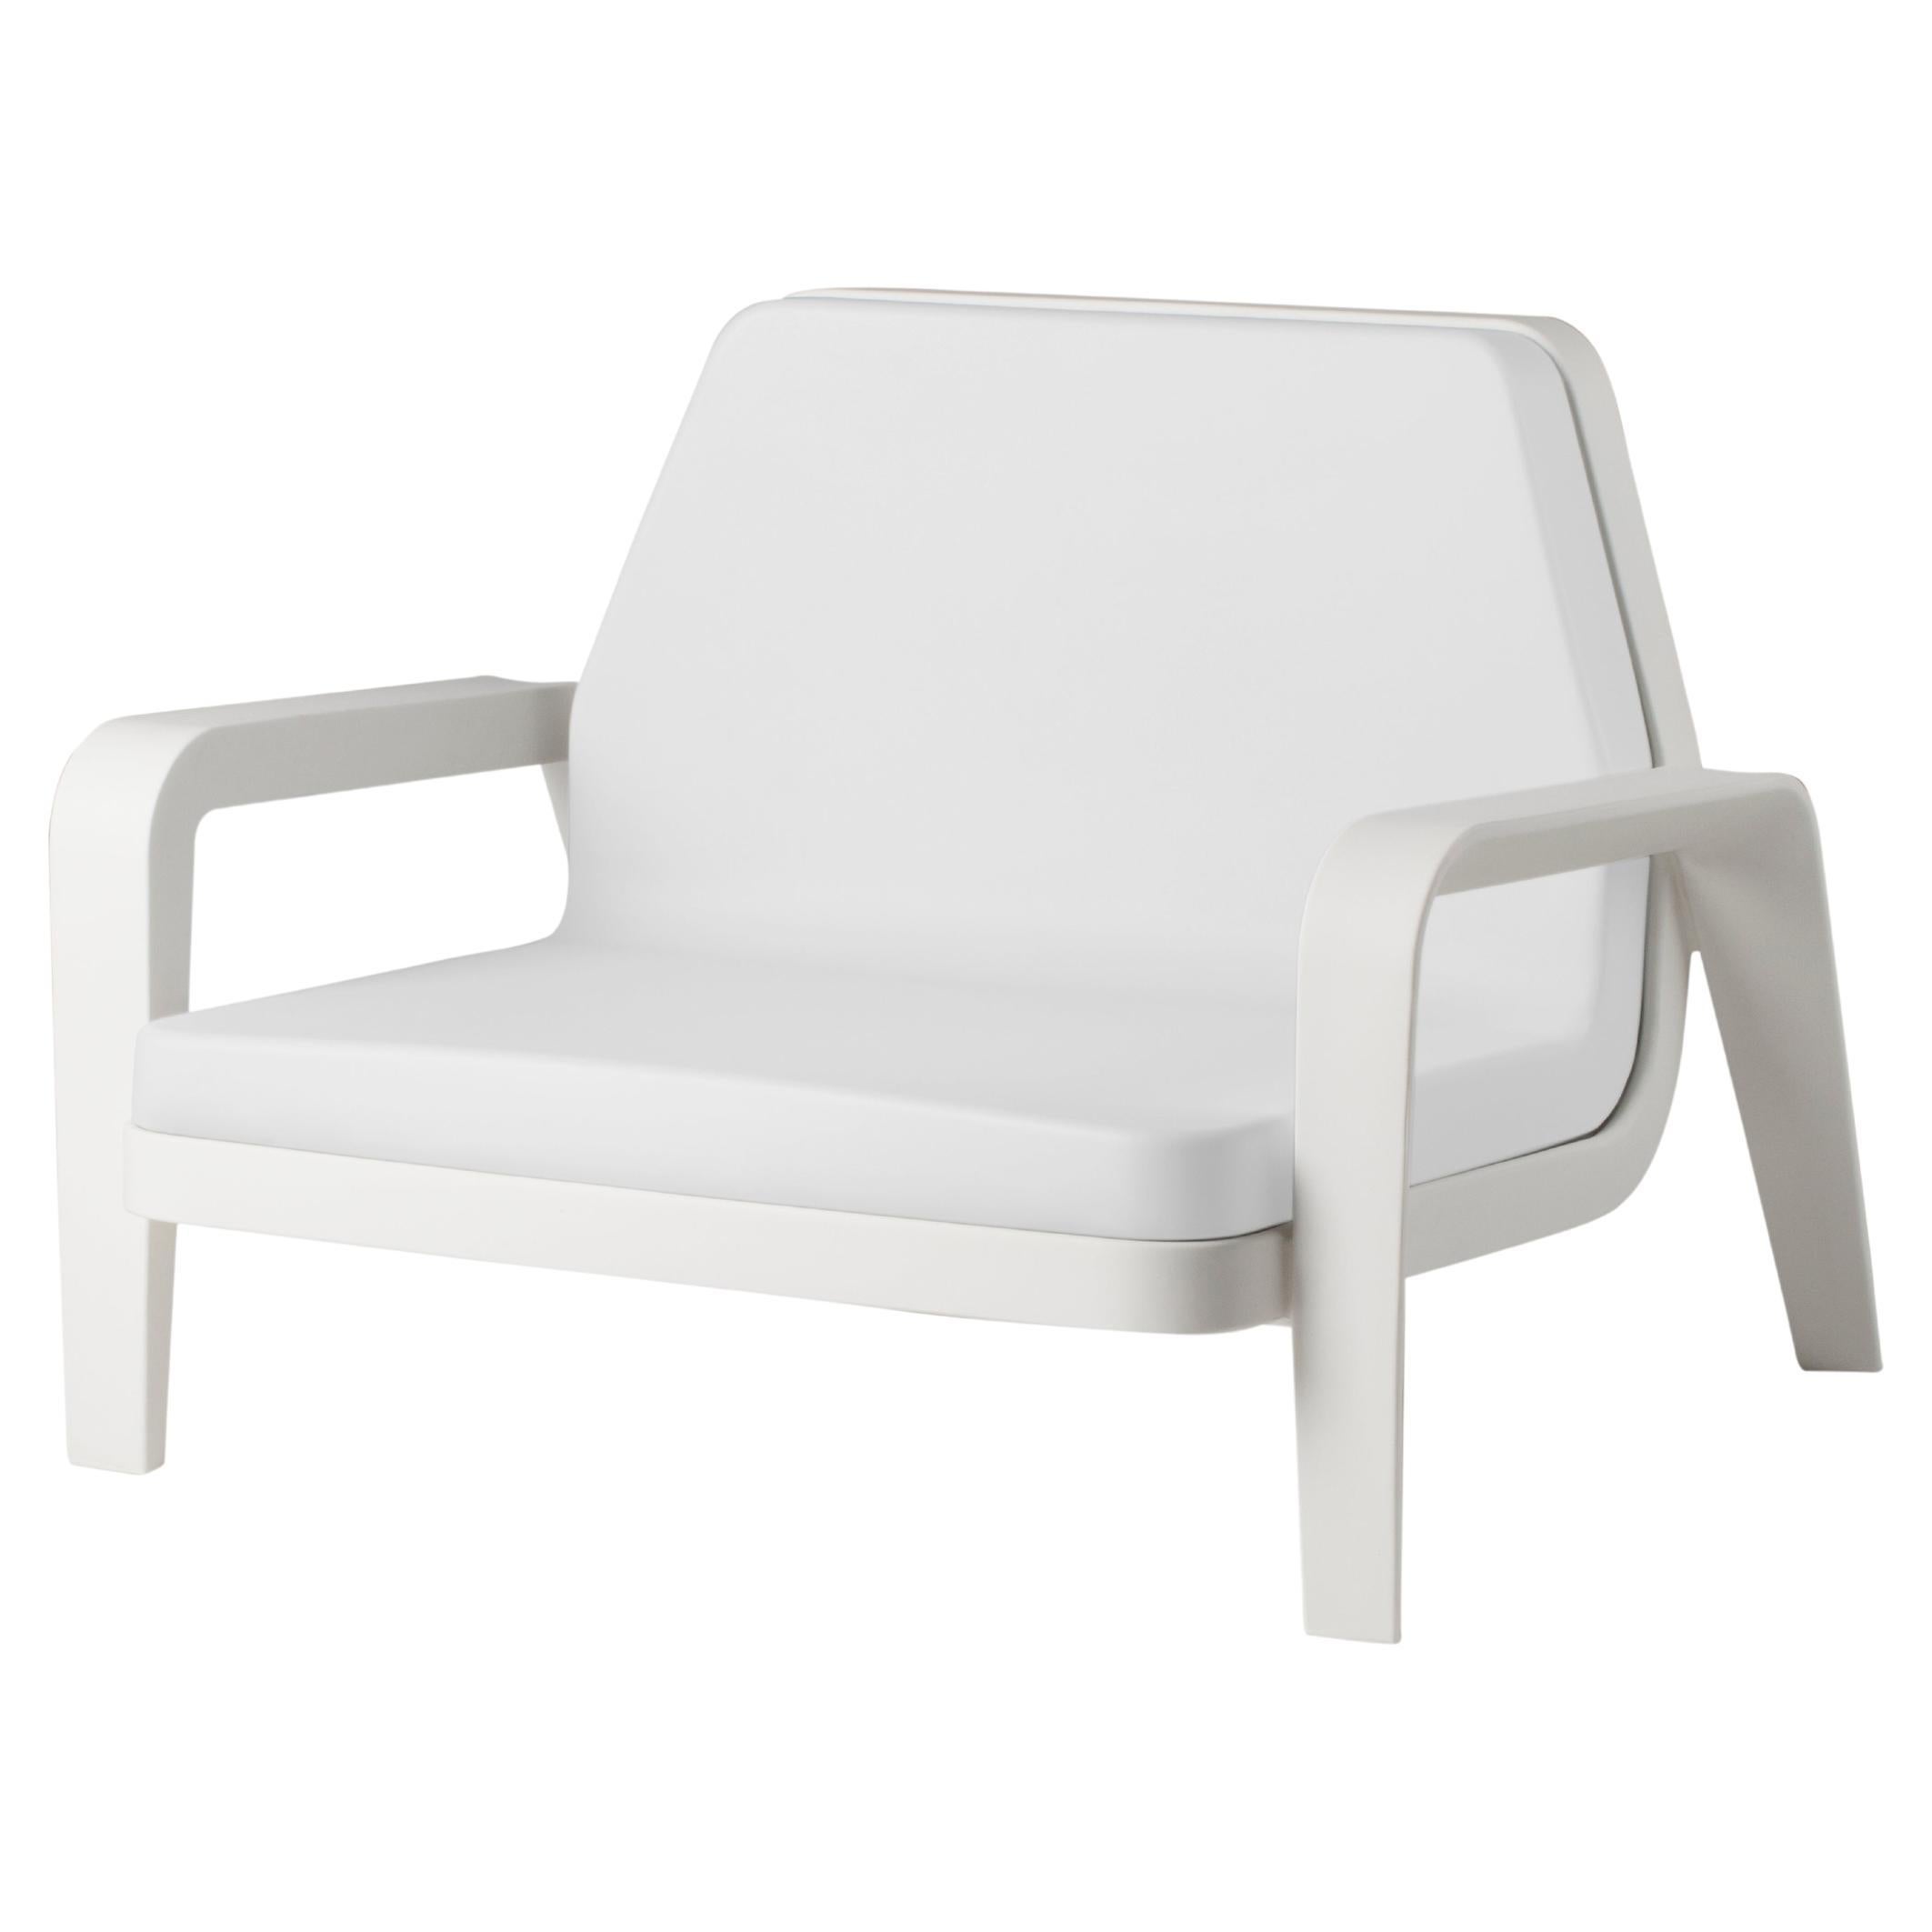 Slide Design America Armchair in Soft White Fabric with Milky White Frame